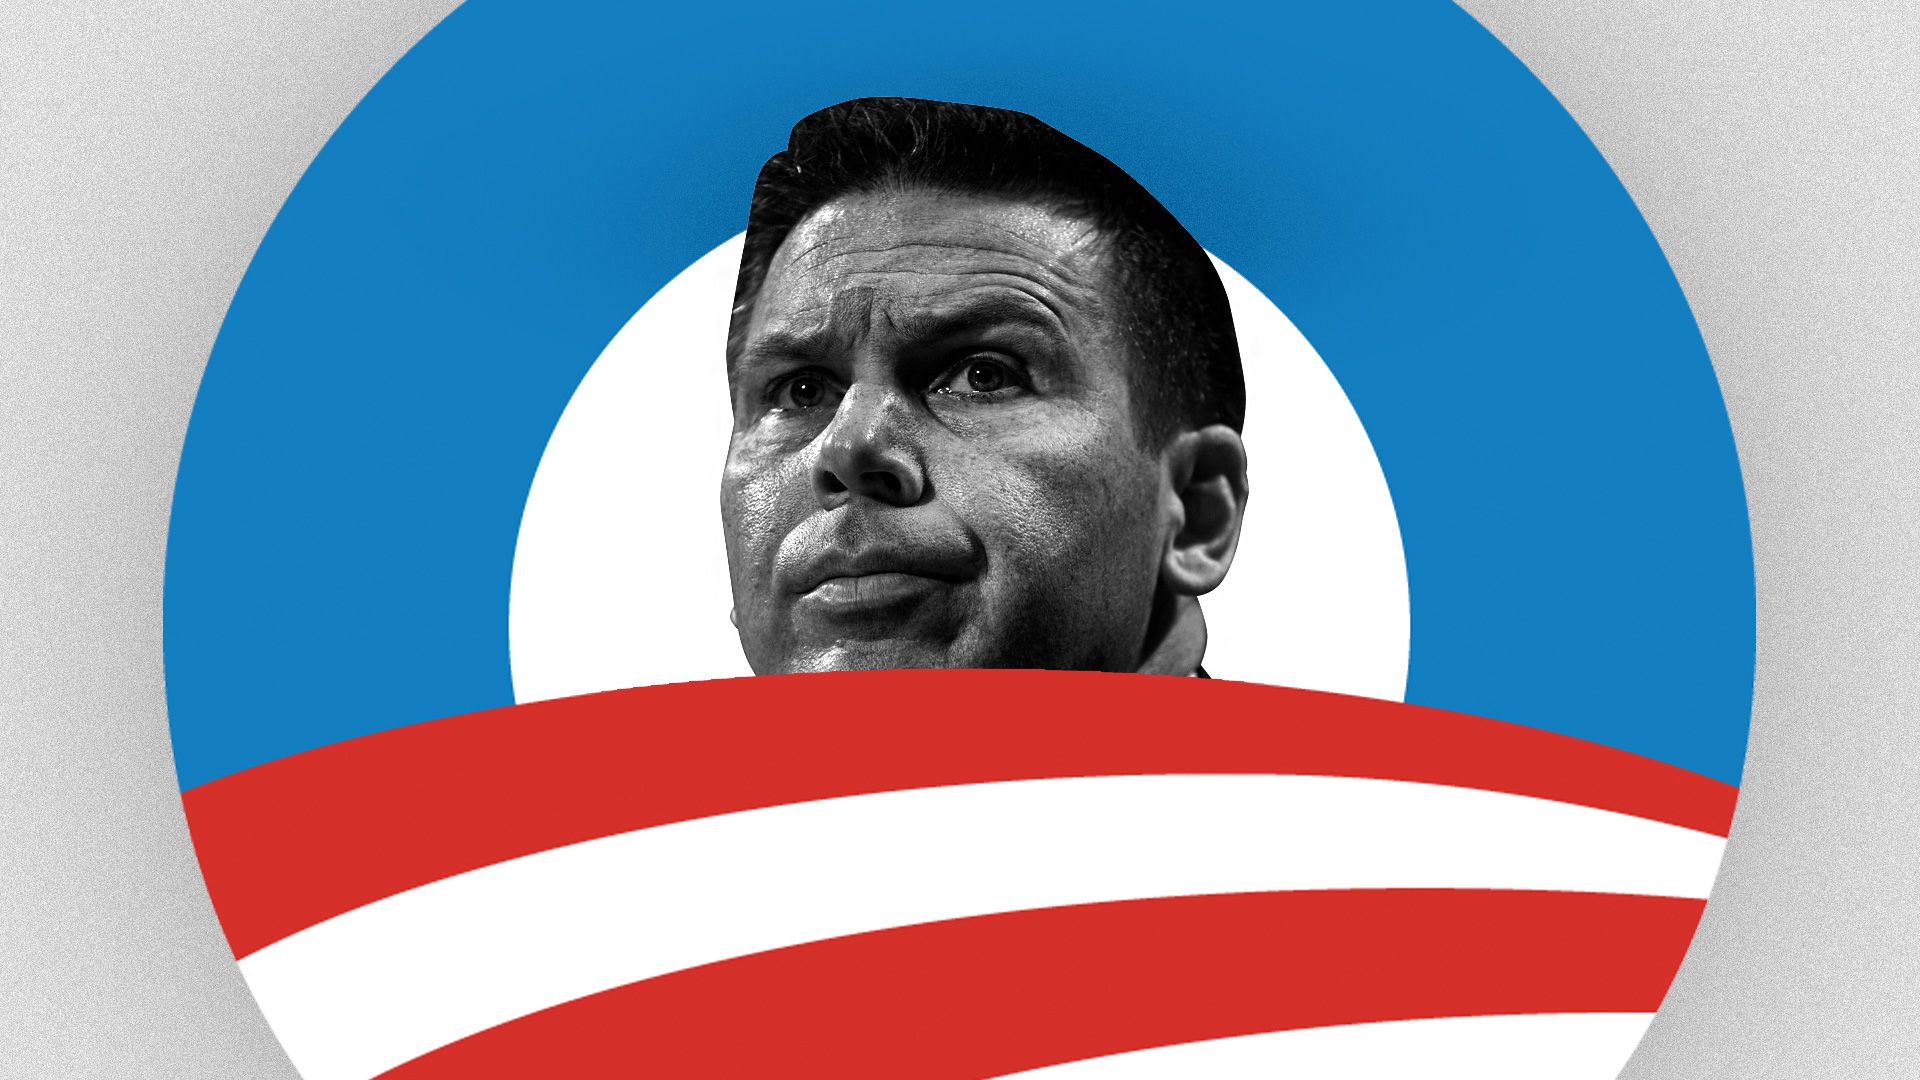 illustration of Kevin McAleenan emerging from an Obama campaign logo